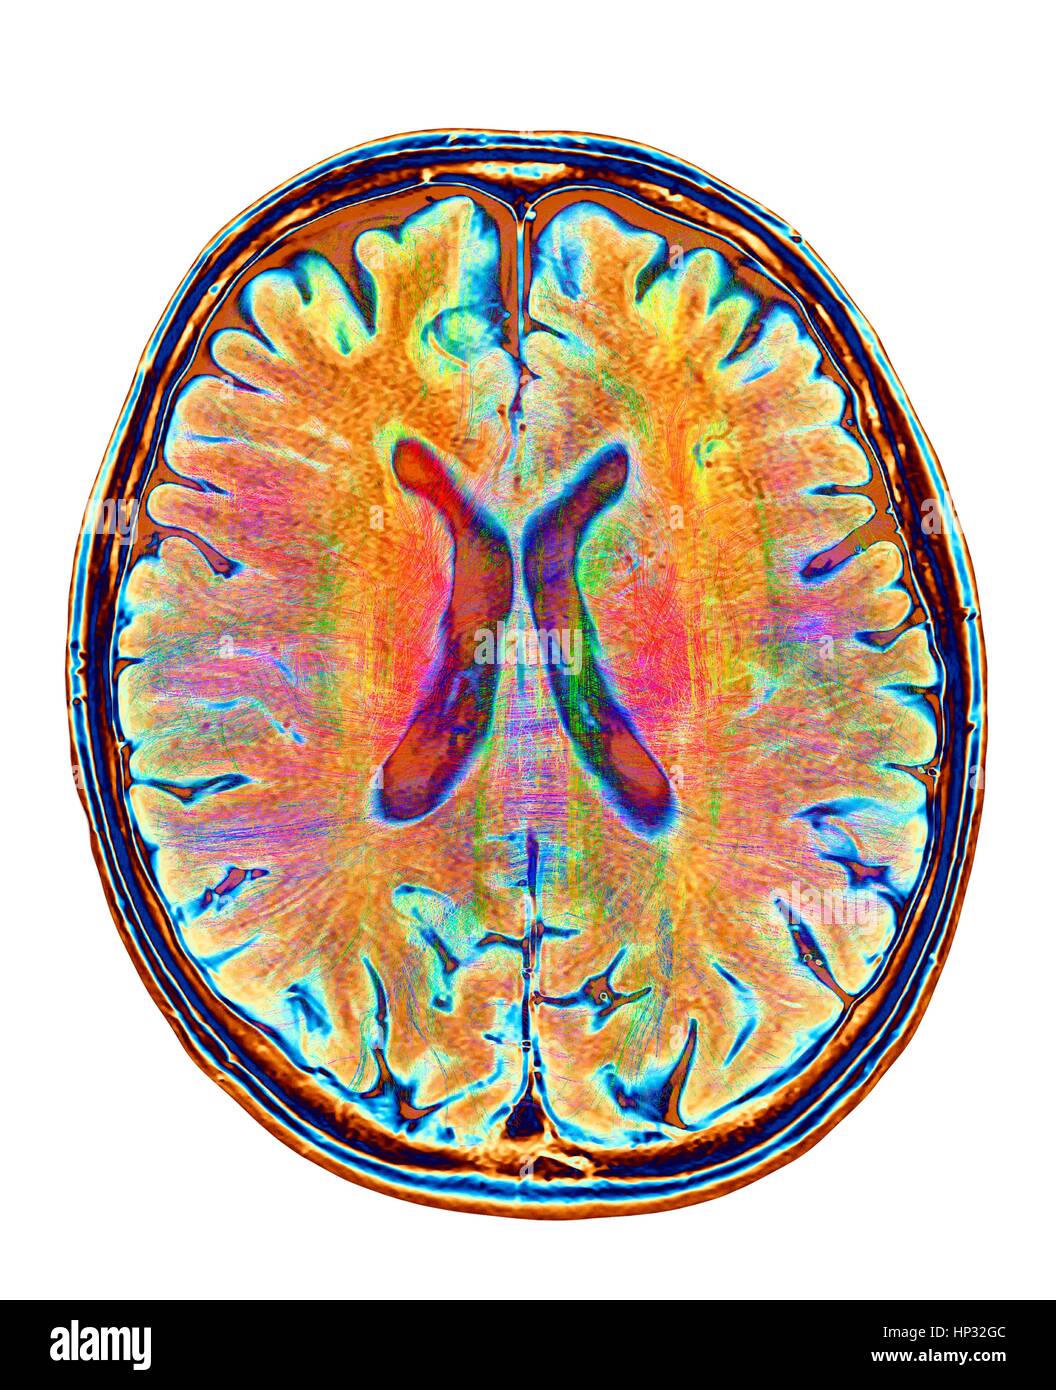 Computer artwork of MRI top view of brain showing white matter fibres.Coloured 3D diffusion spectral imaging (DSI) scan of bundles of white matter nerve fibres in brain.The fibres transmit nerve signals between brain regions between brain spinal cord.Diffusion spectrum imaging (DSI) is variant of Stock Photo